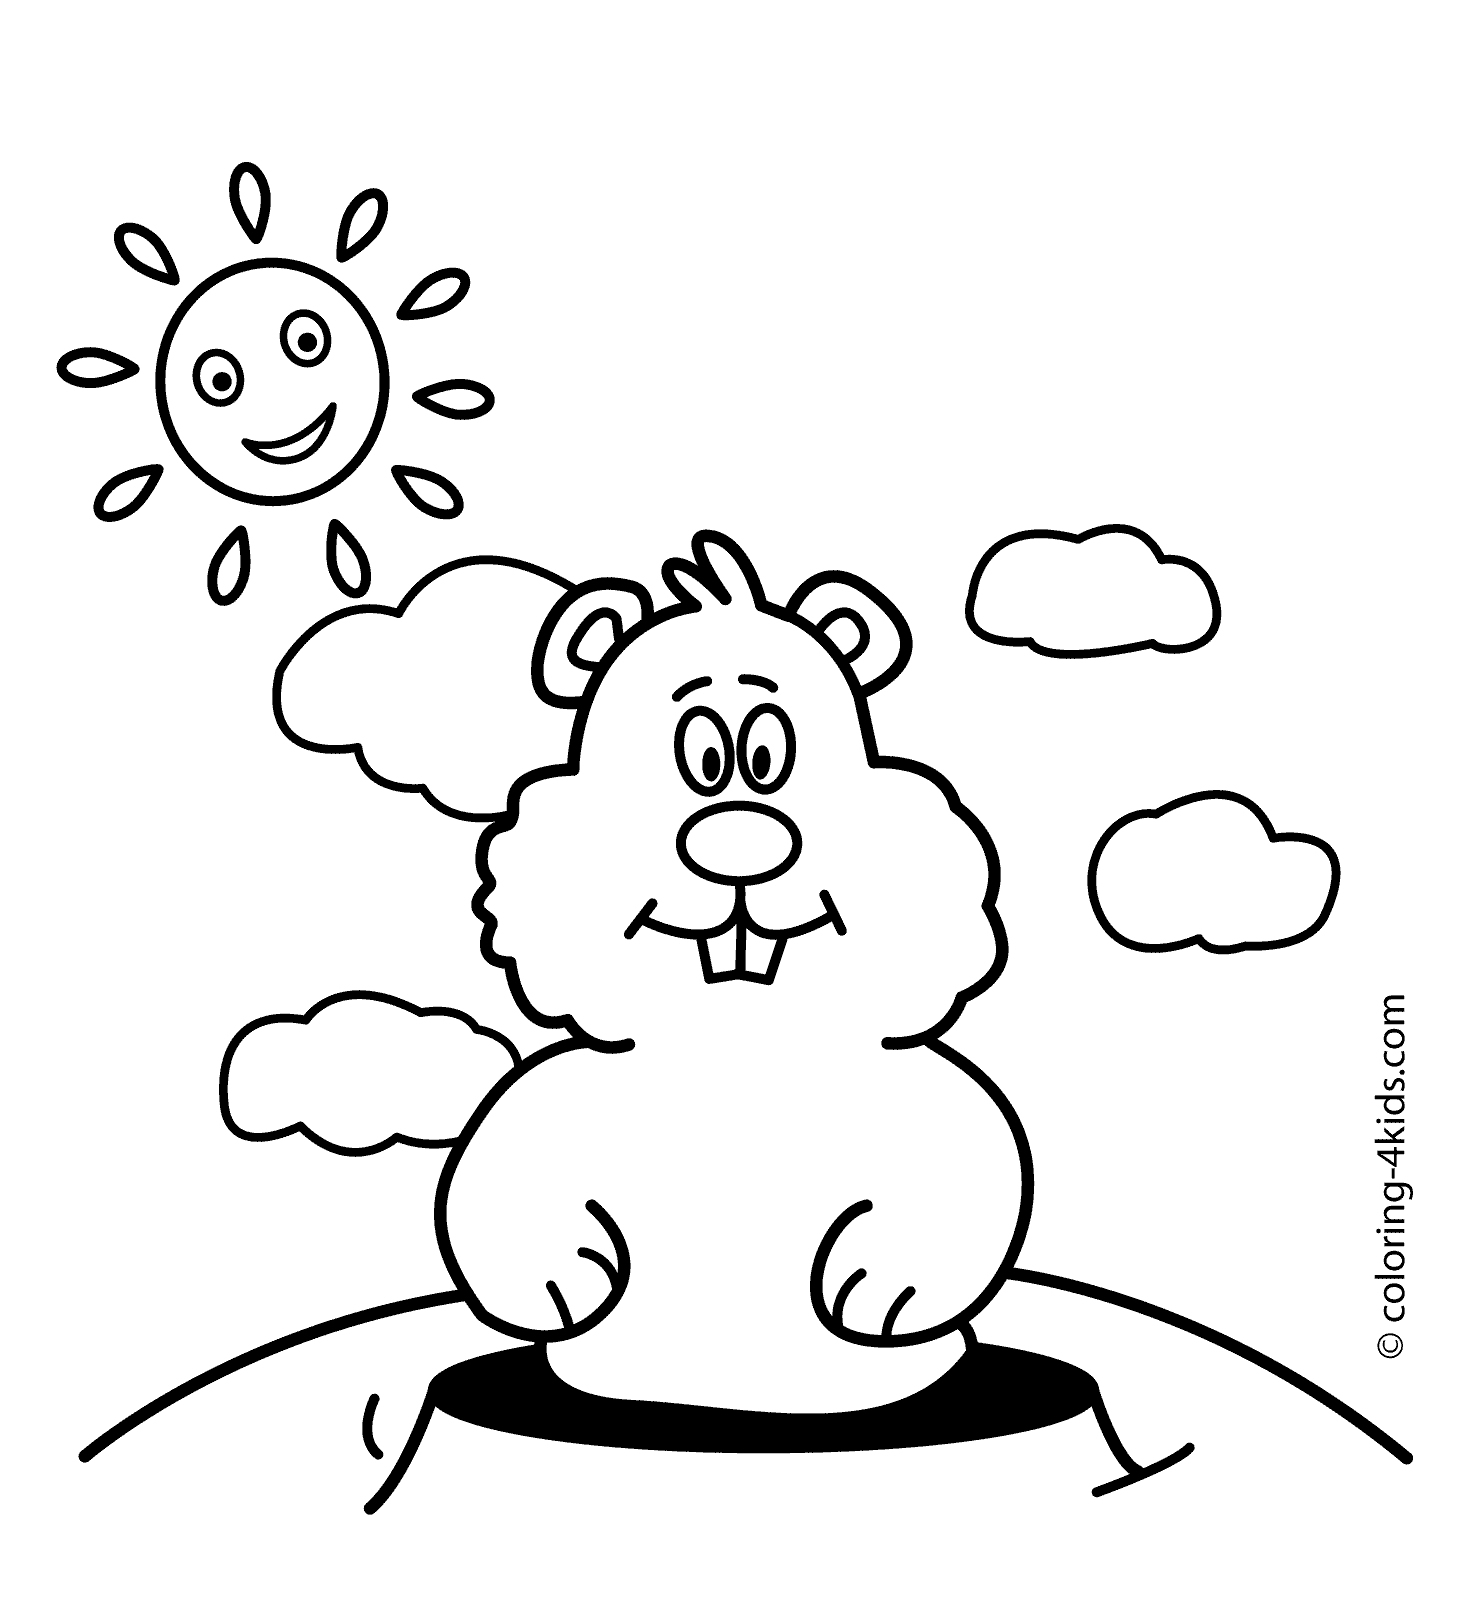 February Coloring Pages Groundhog Day For Kids 12 Printable Free - Free Printable Groundhog Day Booklet